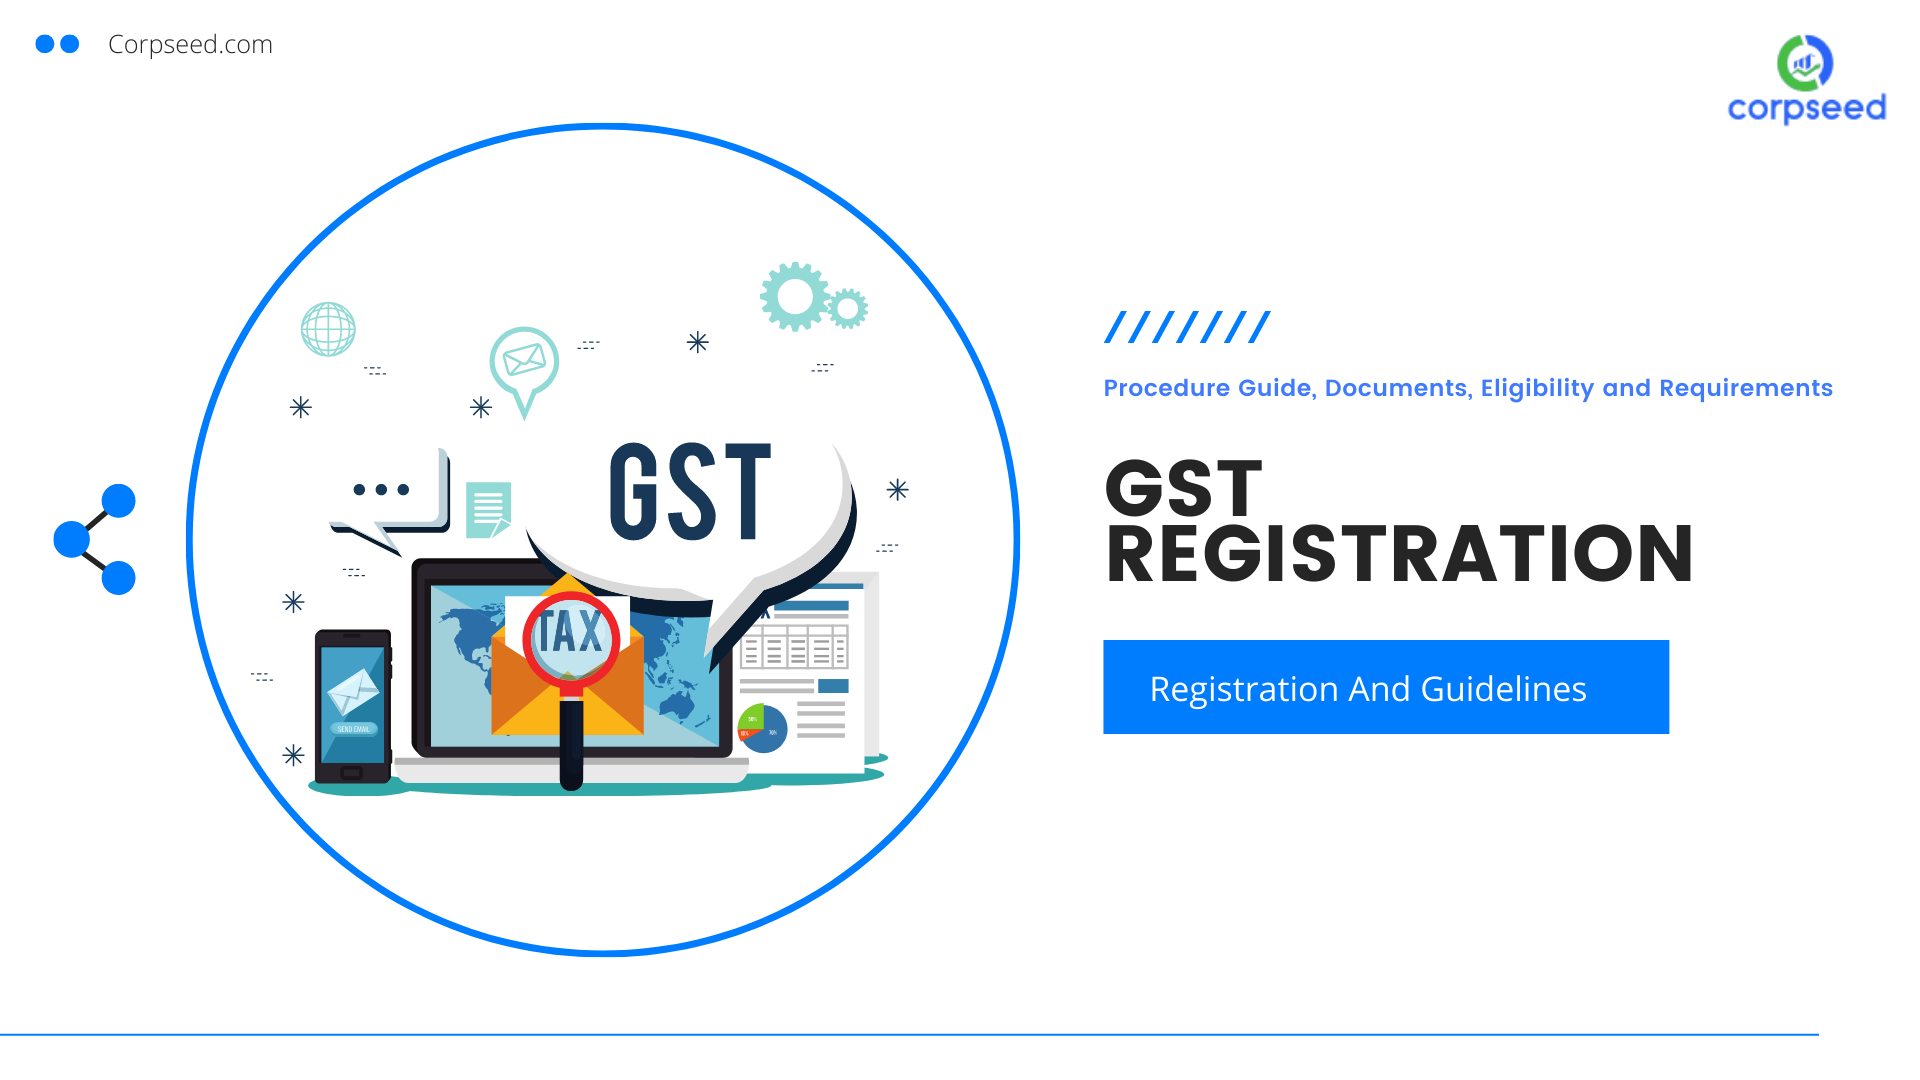 gst-registration-procedure-guide-documents-eligibility-and-requirements-corpseed.png